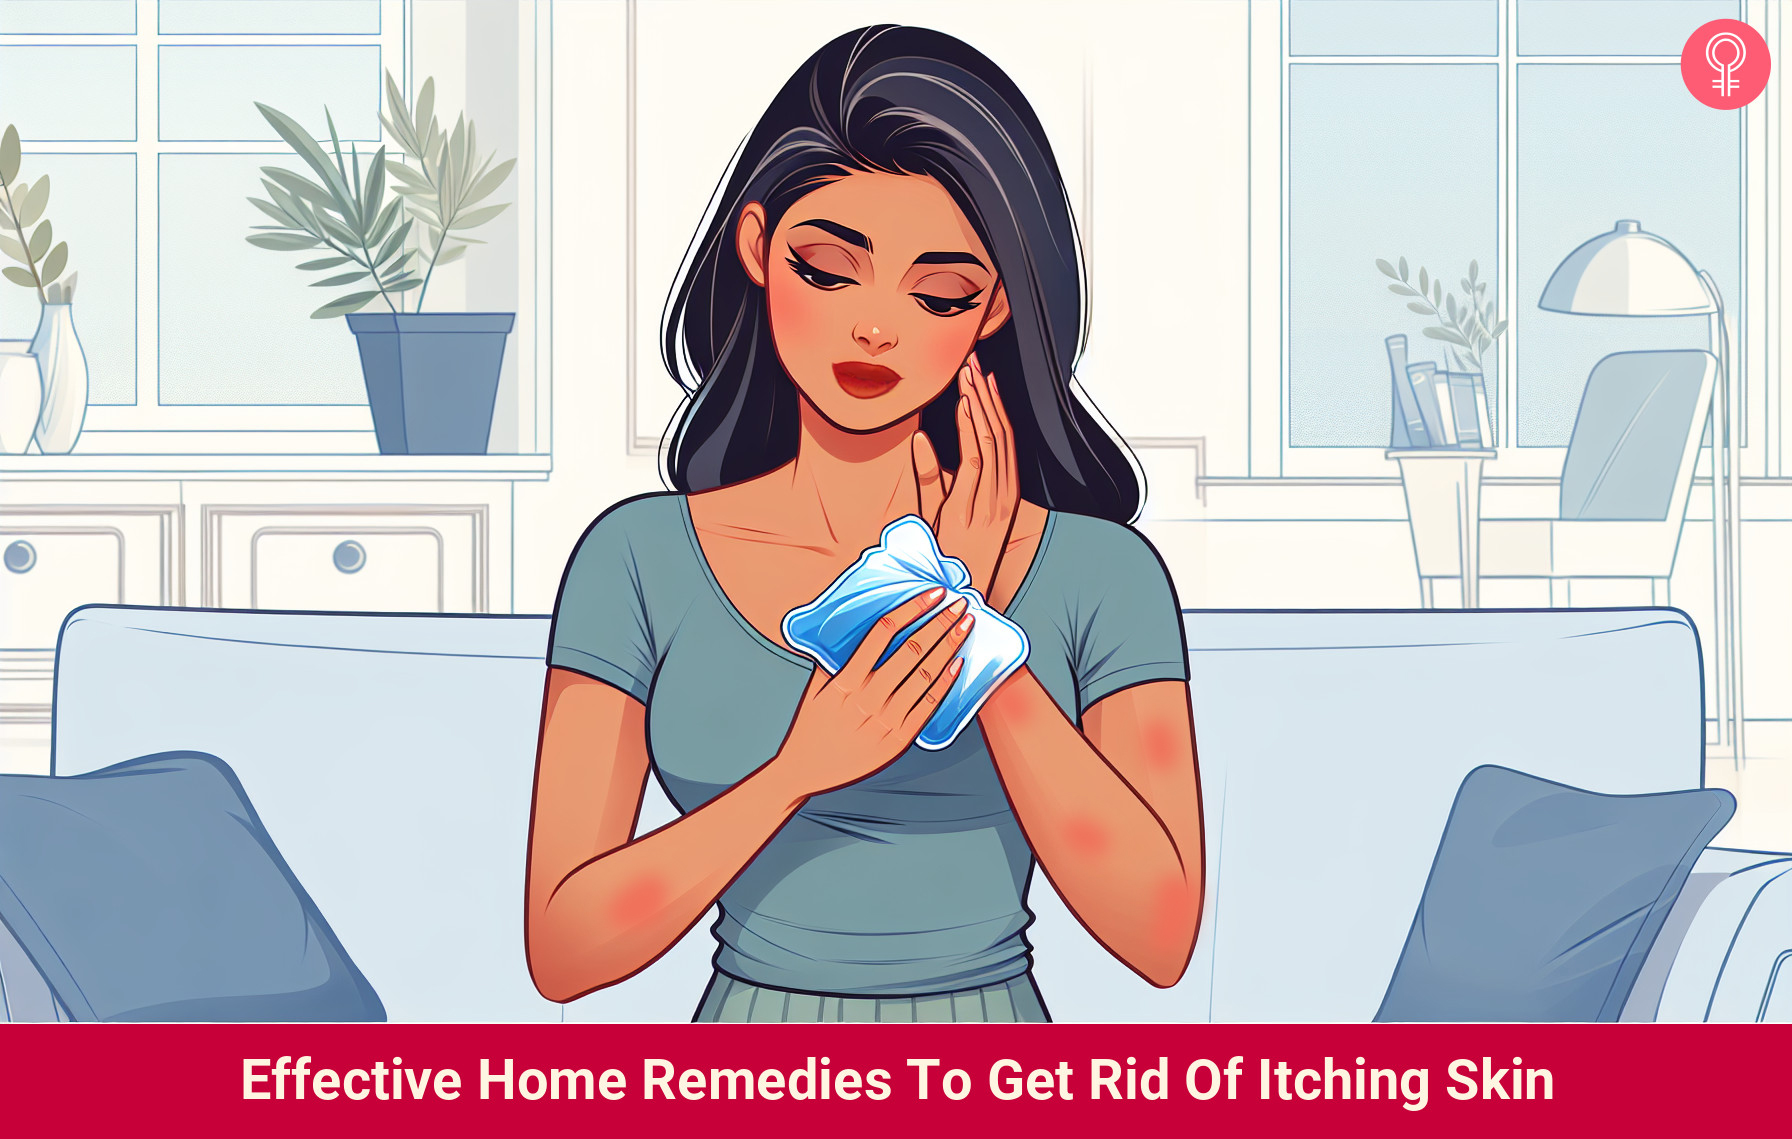 19 Effective Home Remedies To Get Rid Of Itching Skin